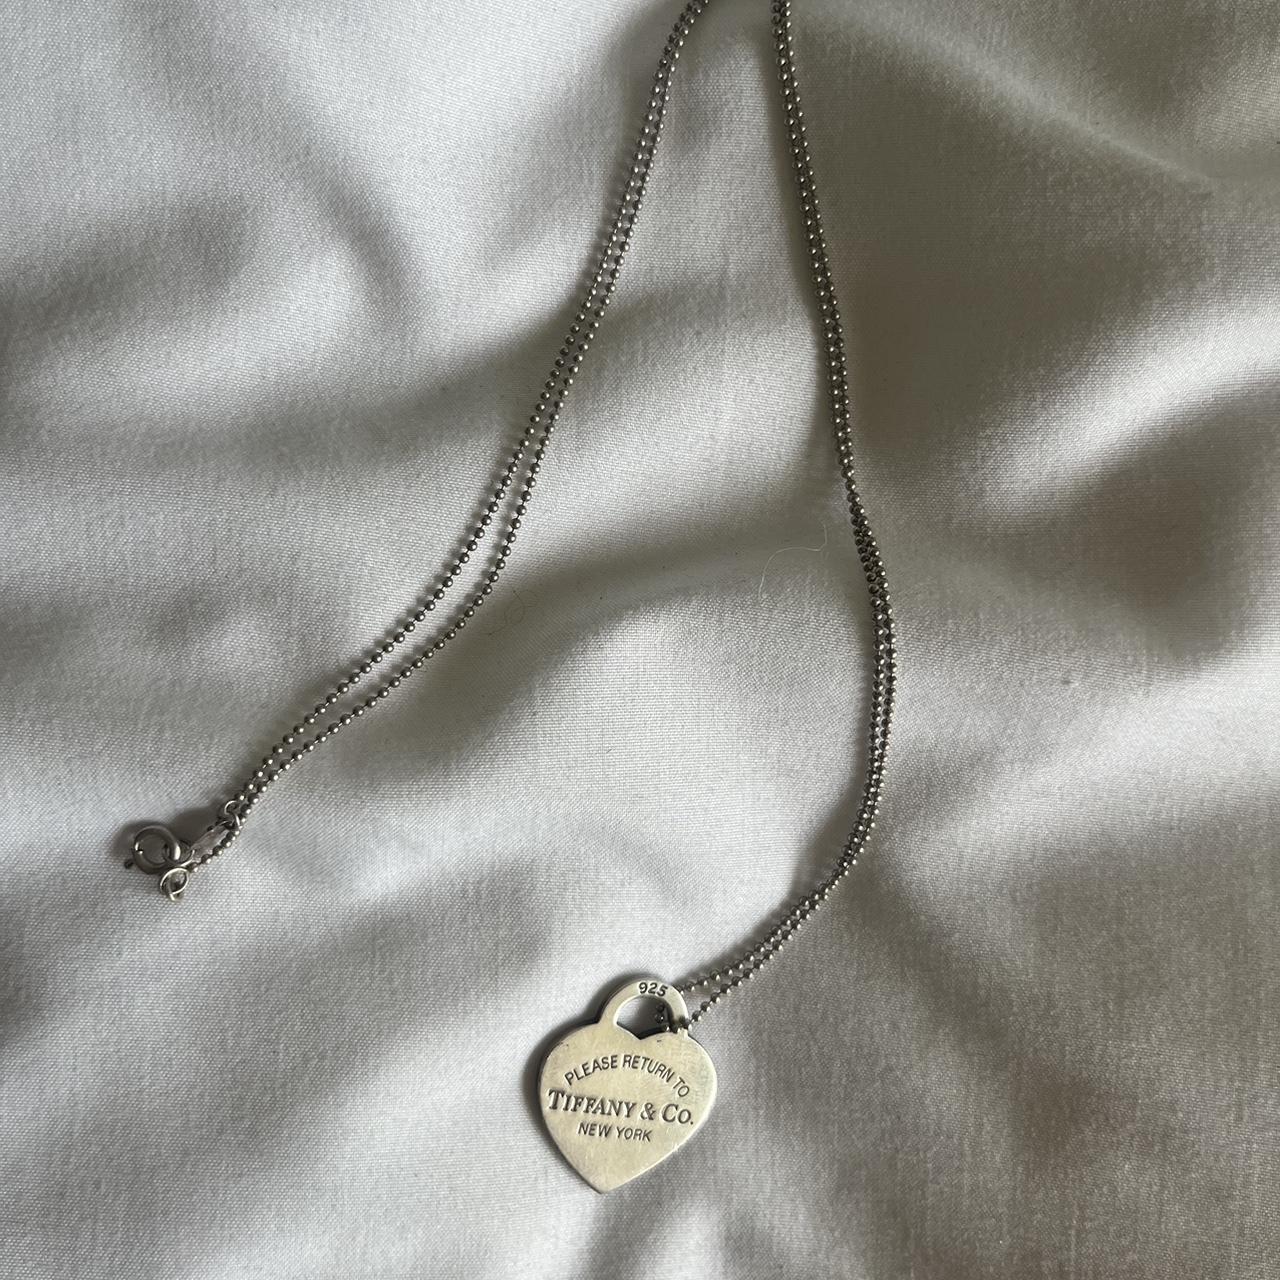 Tiffany heart necklace. 100% authentic has the 925... - Depop